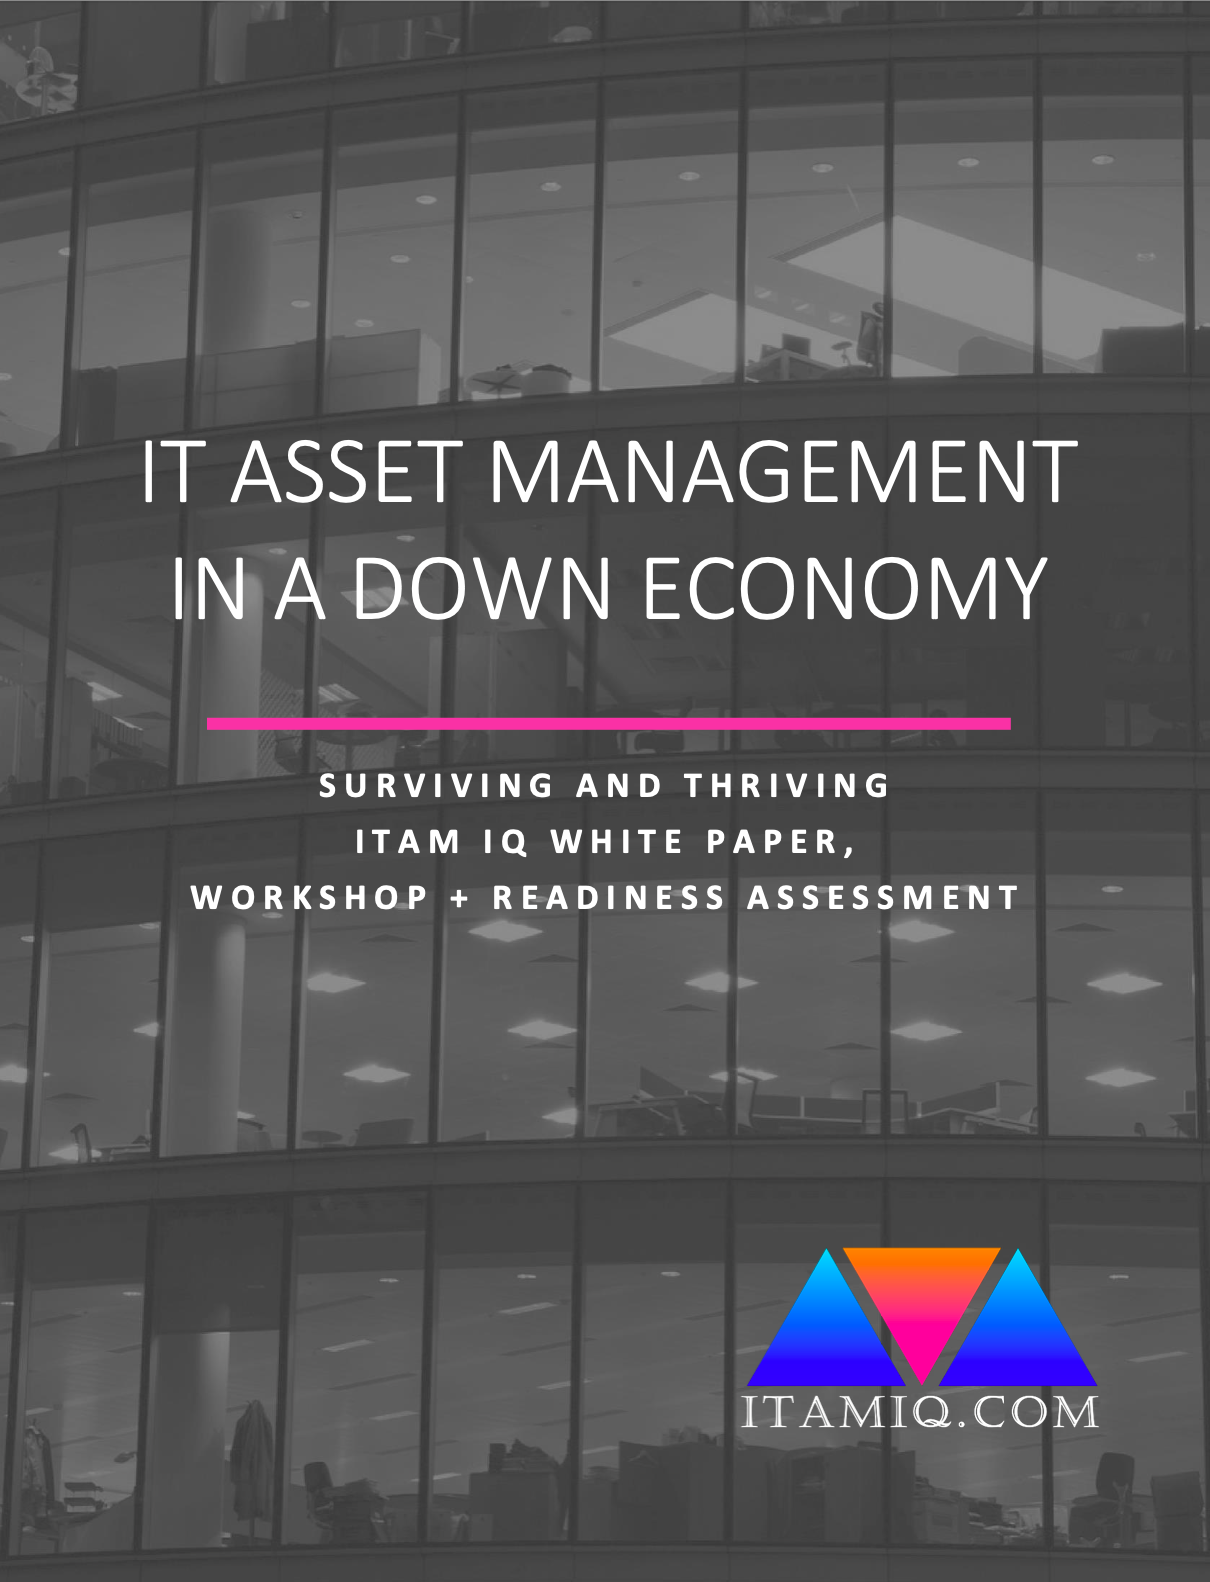 ITAM in a Down Economy, IT Asset Management Free Course